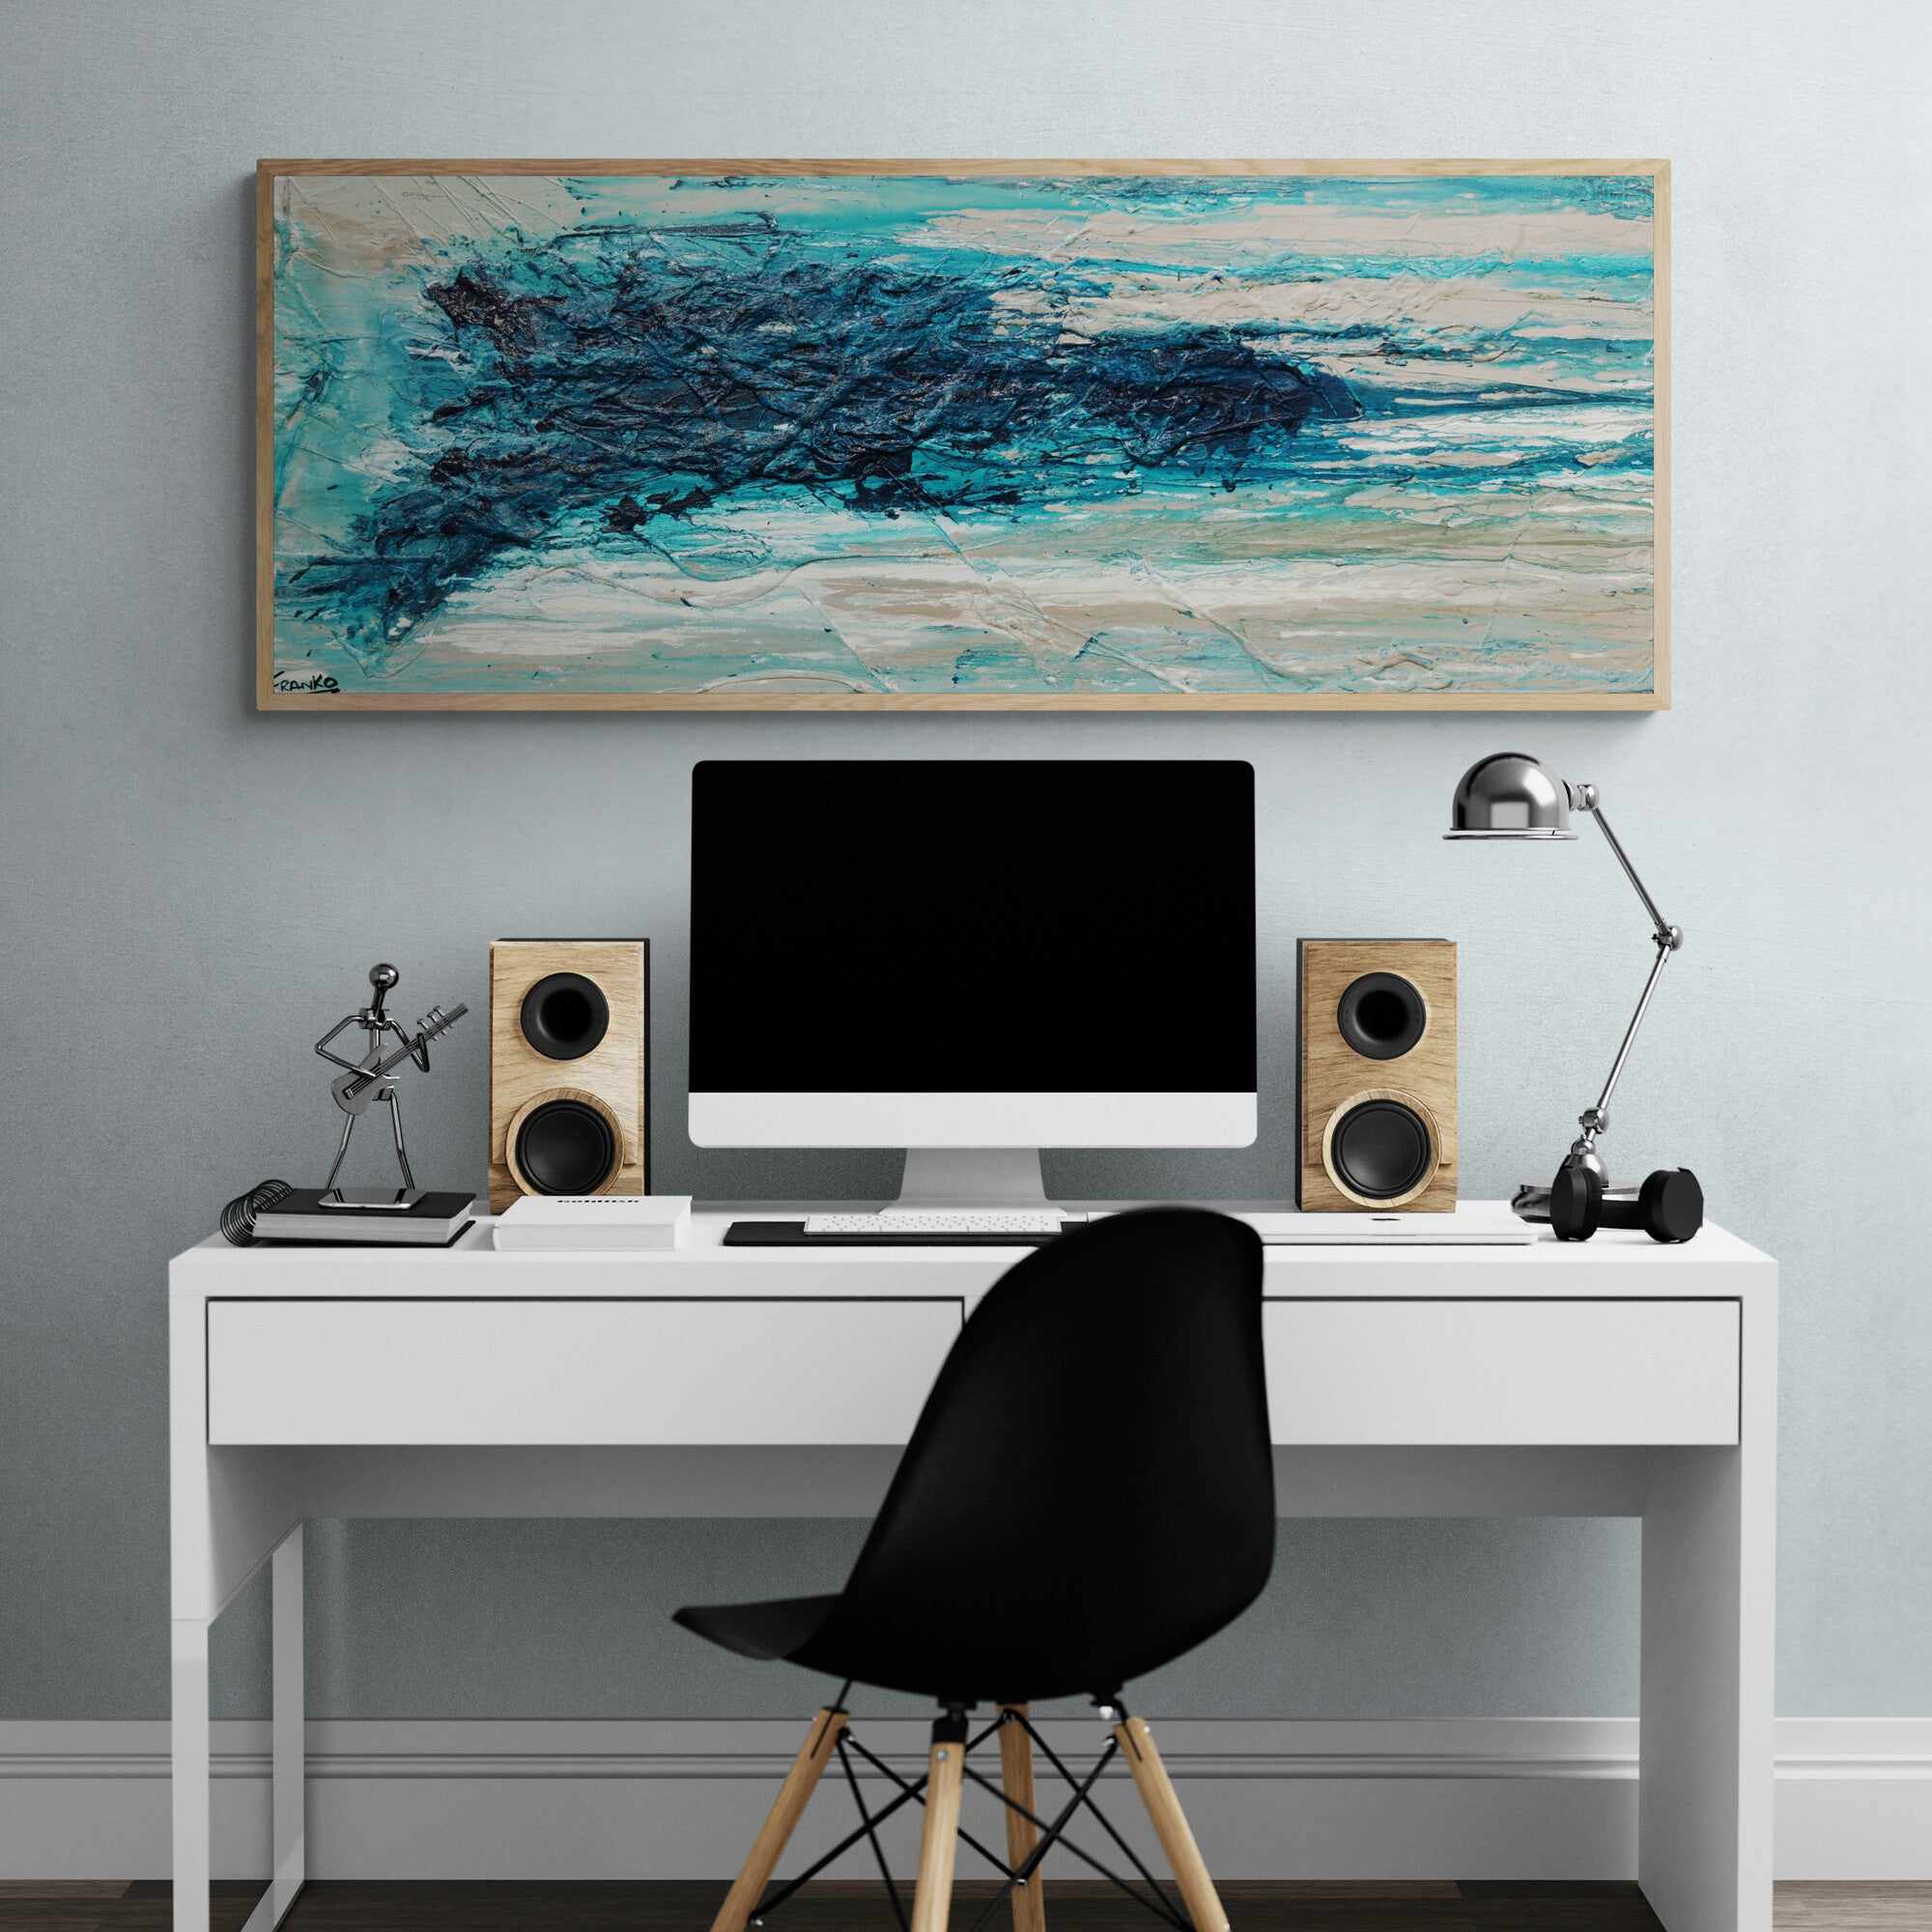 The Malted Southern 160cm x 60cm Cream Blue Textured Abstract Painting-Abstract-Franko-[franko_artist]-[Art]-[interior_design]-Franklin Art Studio